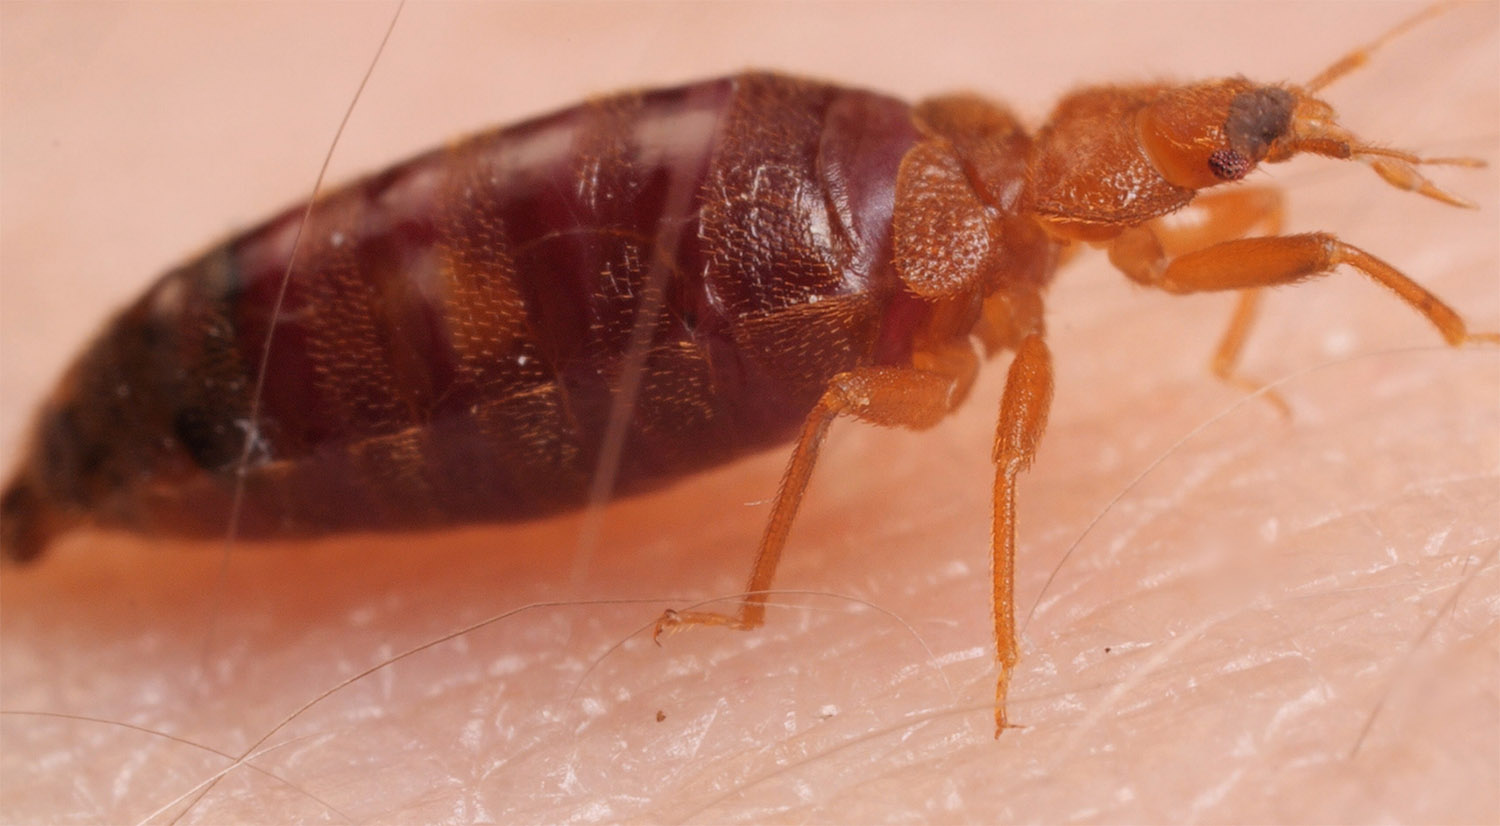 the bed bugs experts domestic bed bug control scotland glasgow edinburgh yorkshire